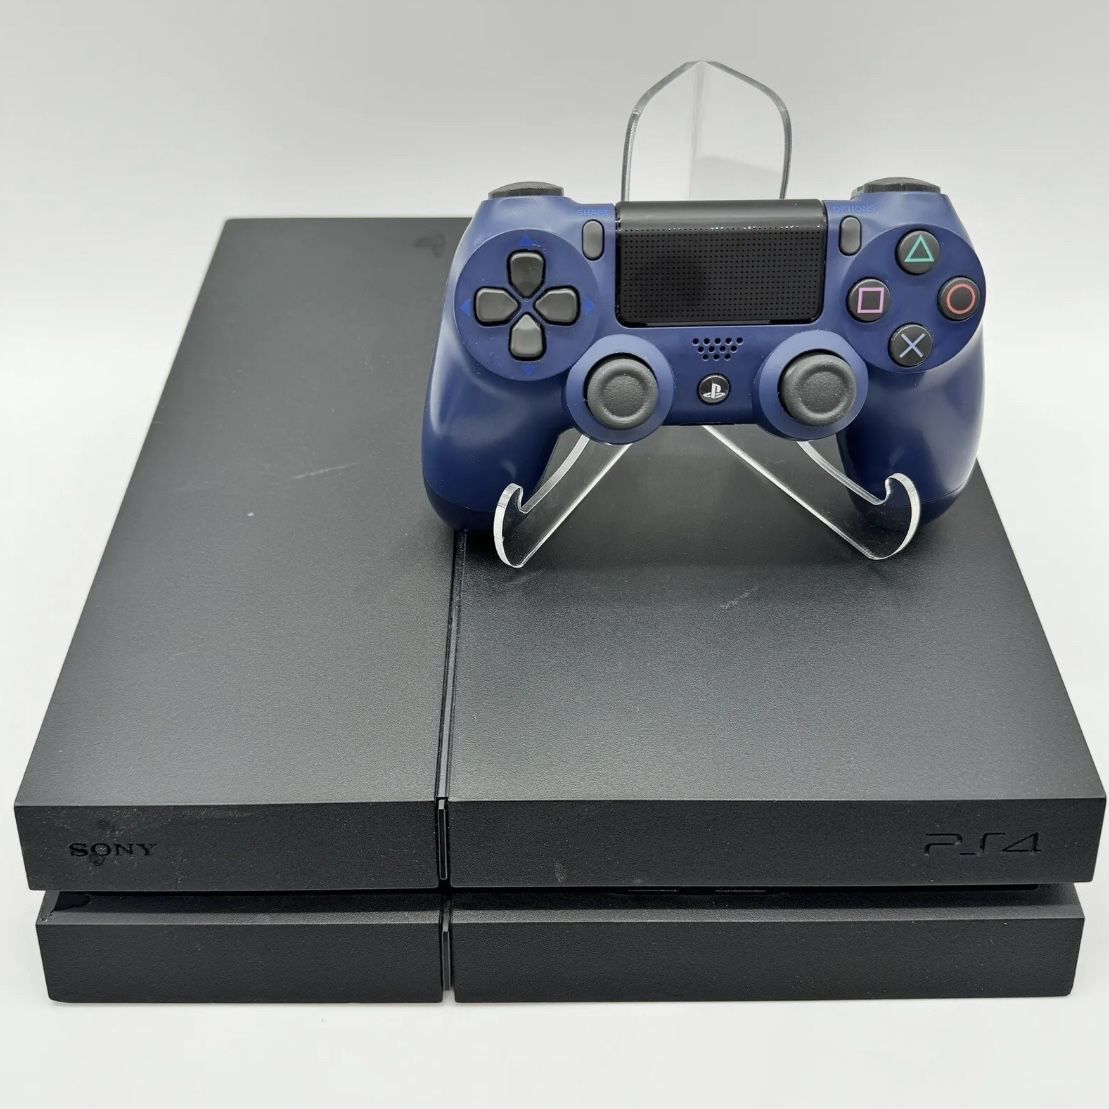 PS4/ PLAYSTATION 4 1TB ORIGINAL CONSOLE WITH WIRES AND CONTROLLER 